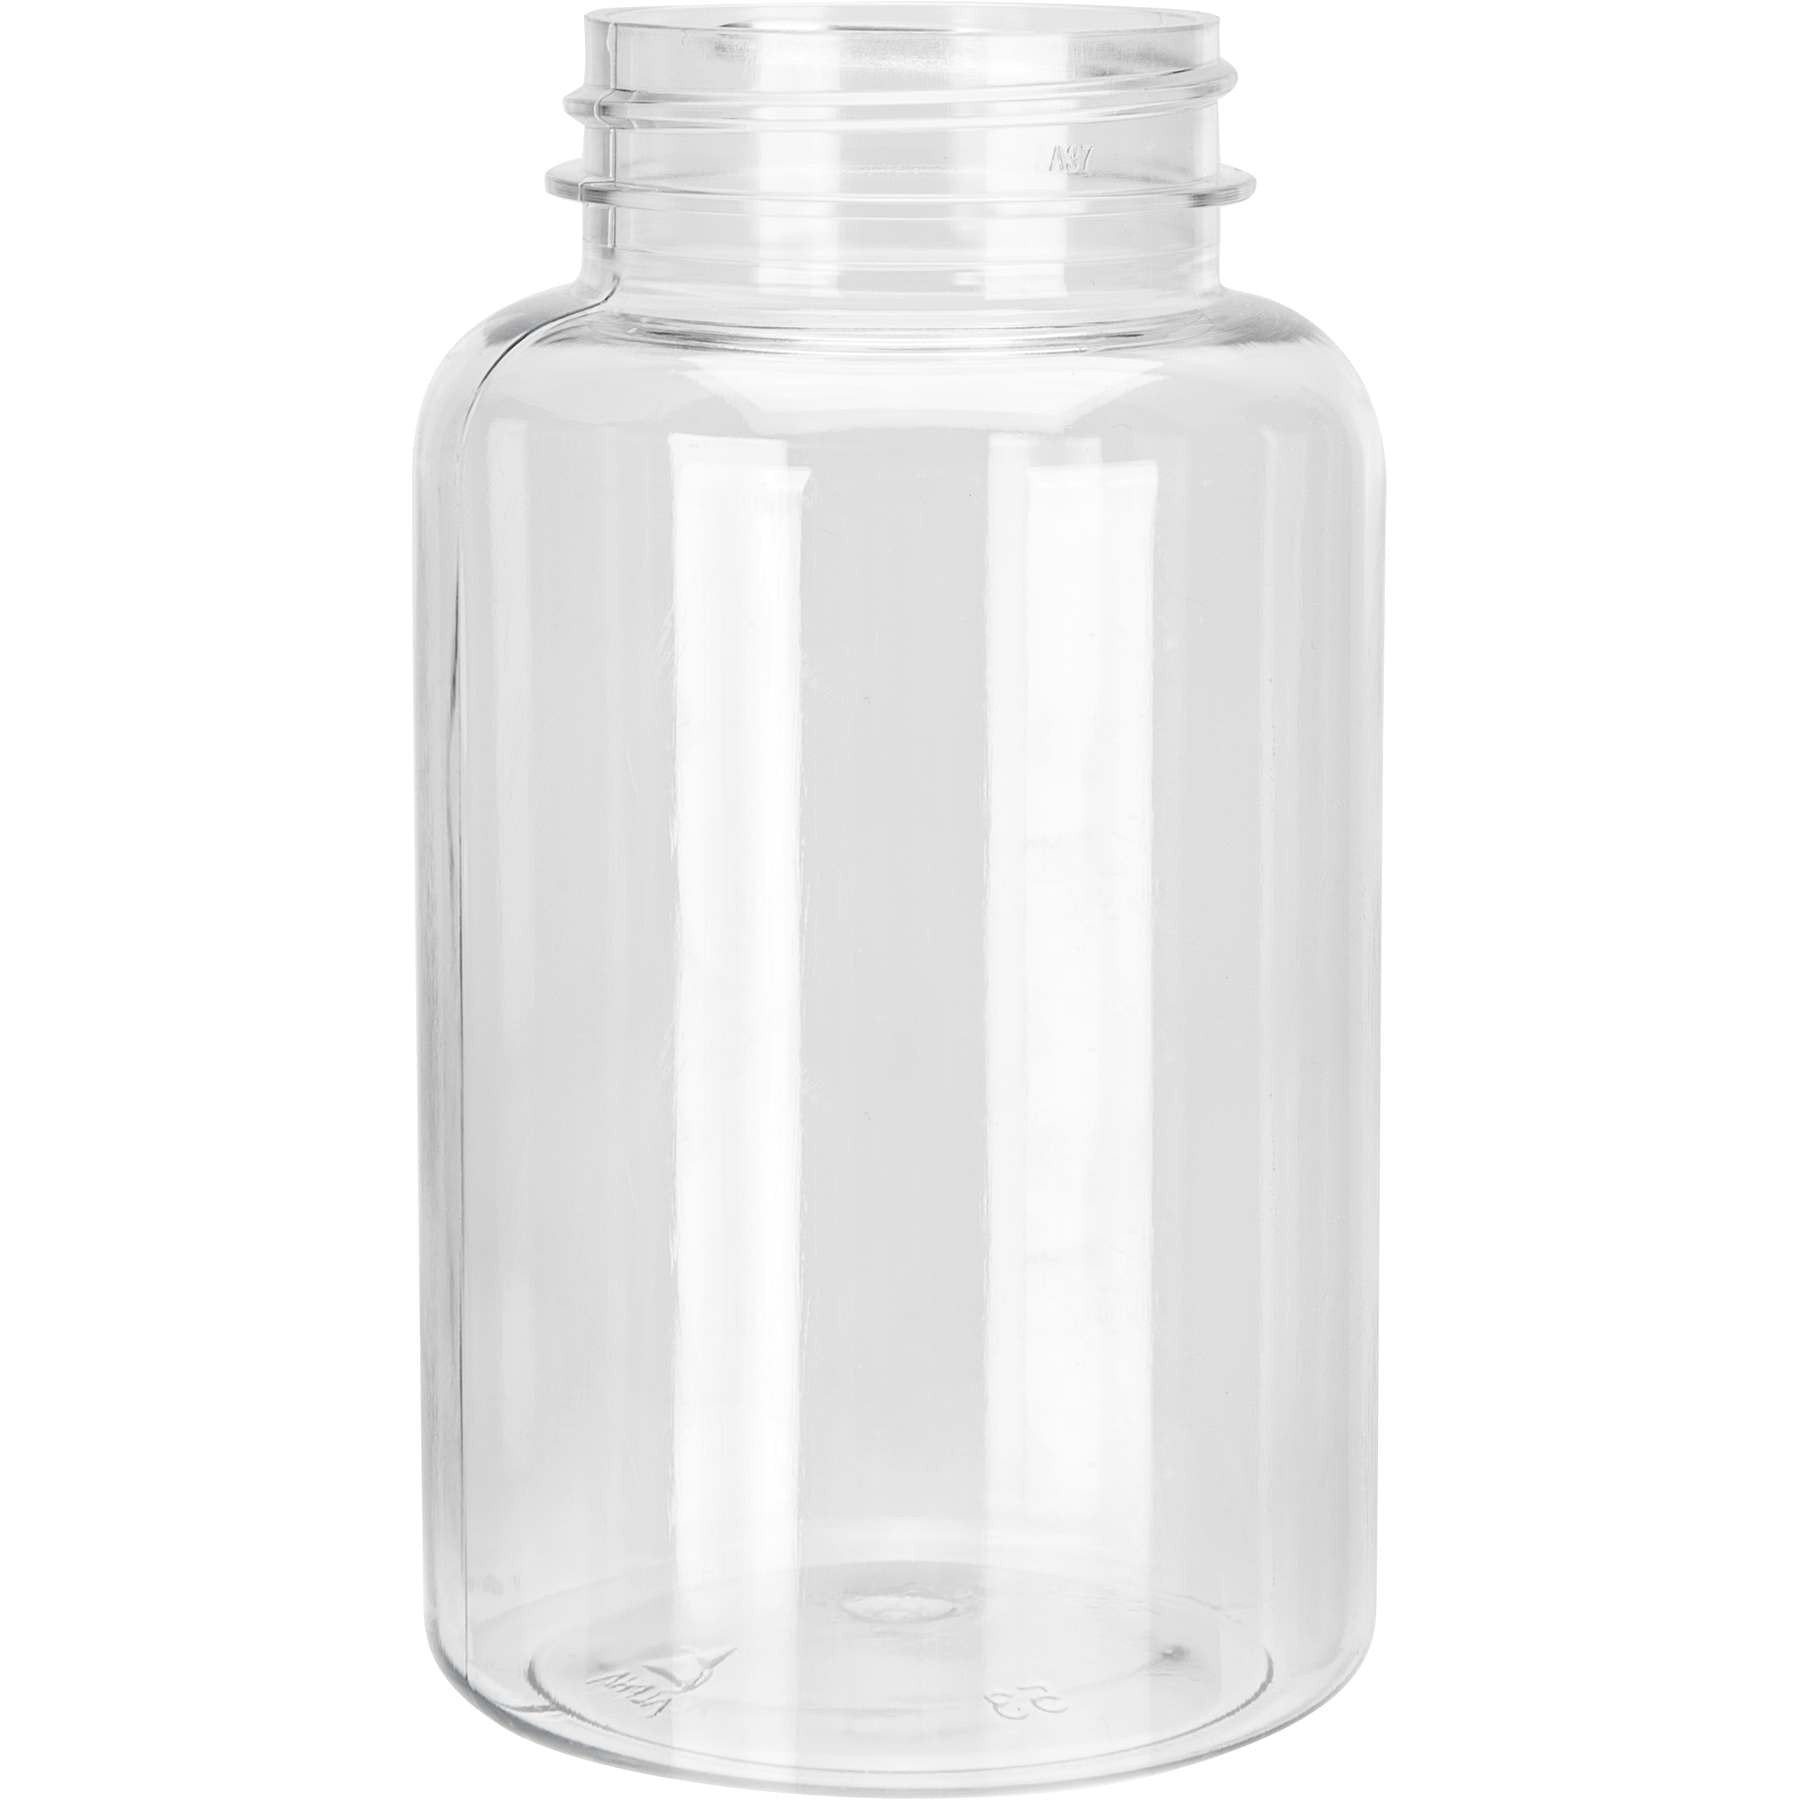 250cc Clear PET Packer bottle with 45-400 Neck Finish - CASED 340 - Rock Bottom Bottles / Packaging Company LLC